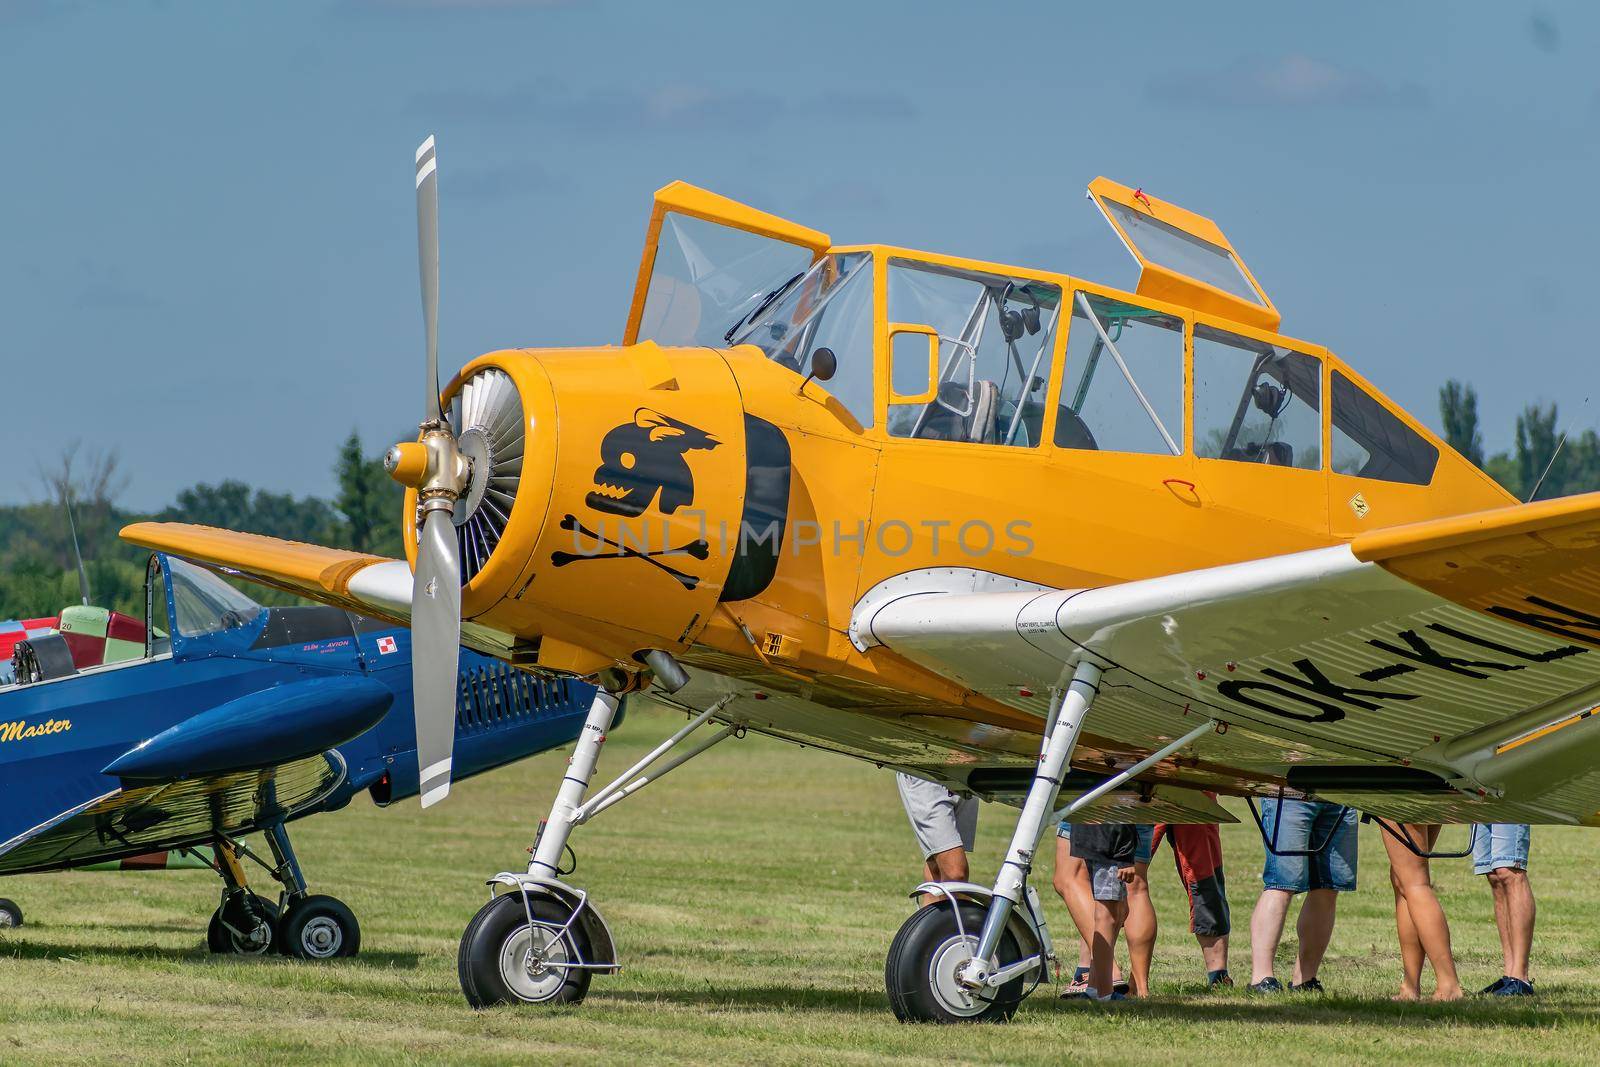 Breclav, Czech Republic - July 02, 2022 Aviation Day. Agricultural aircraft Zlin Z-37A-2 Bumblebee used for spraying and treatment of fields